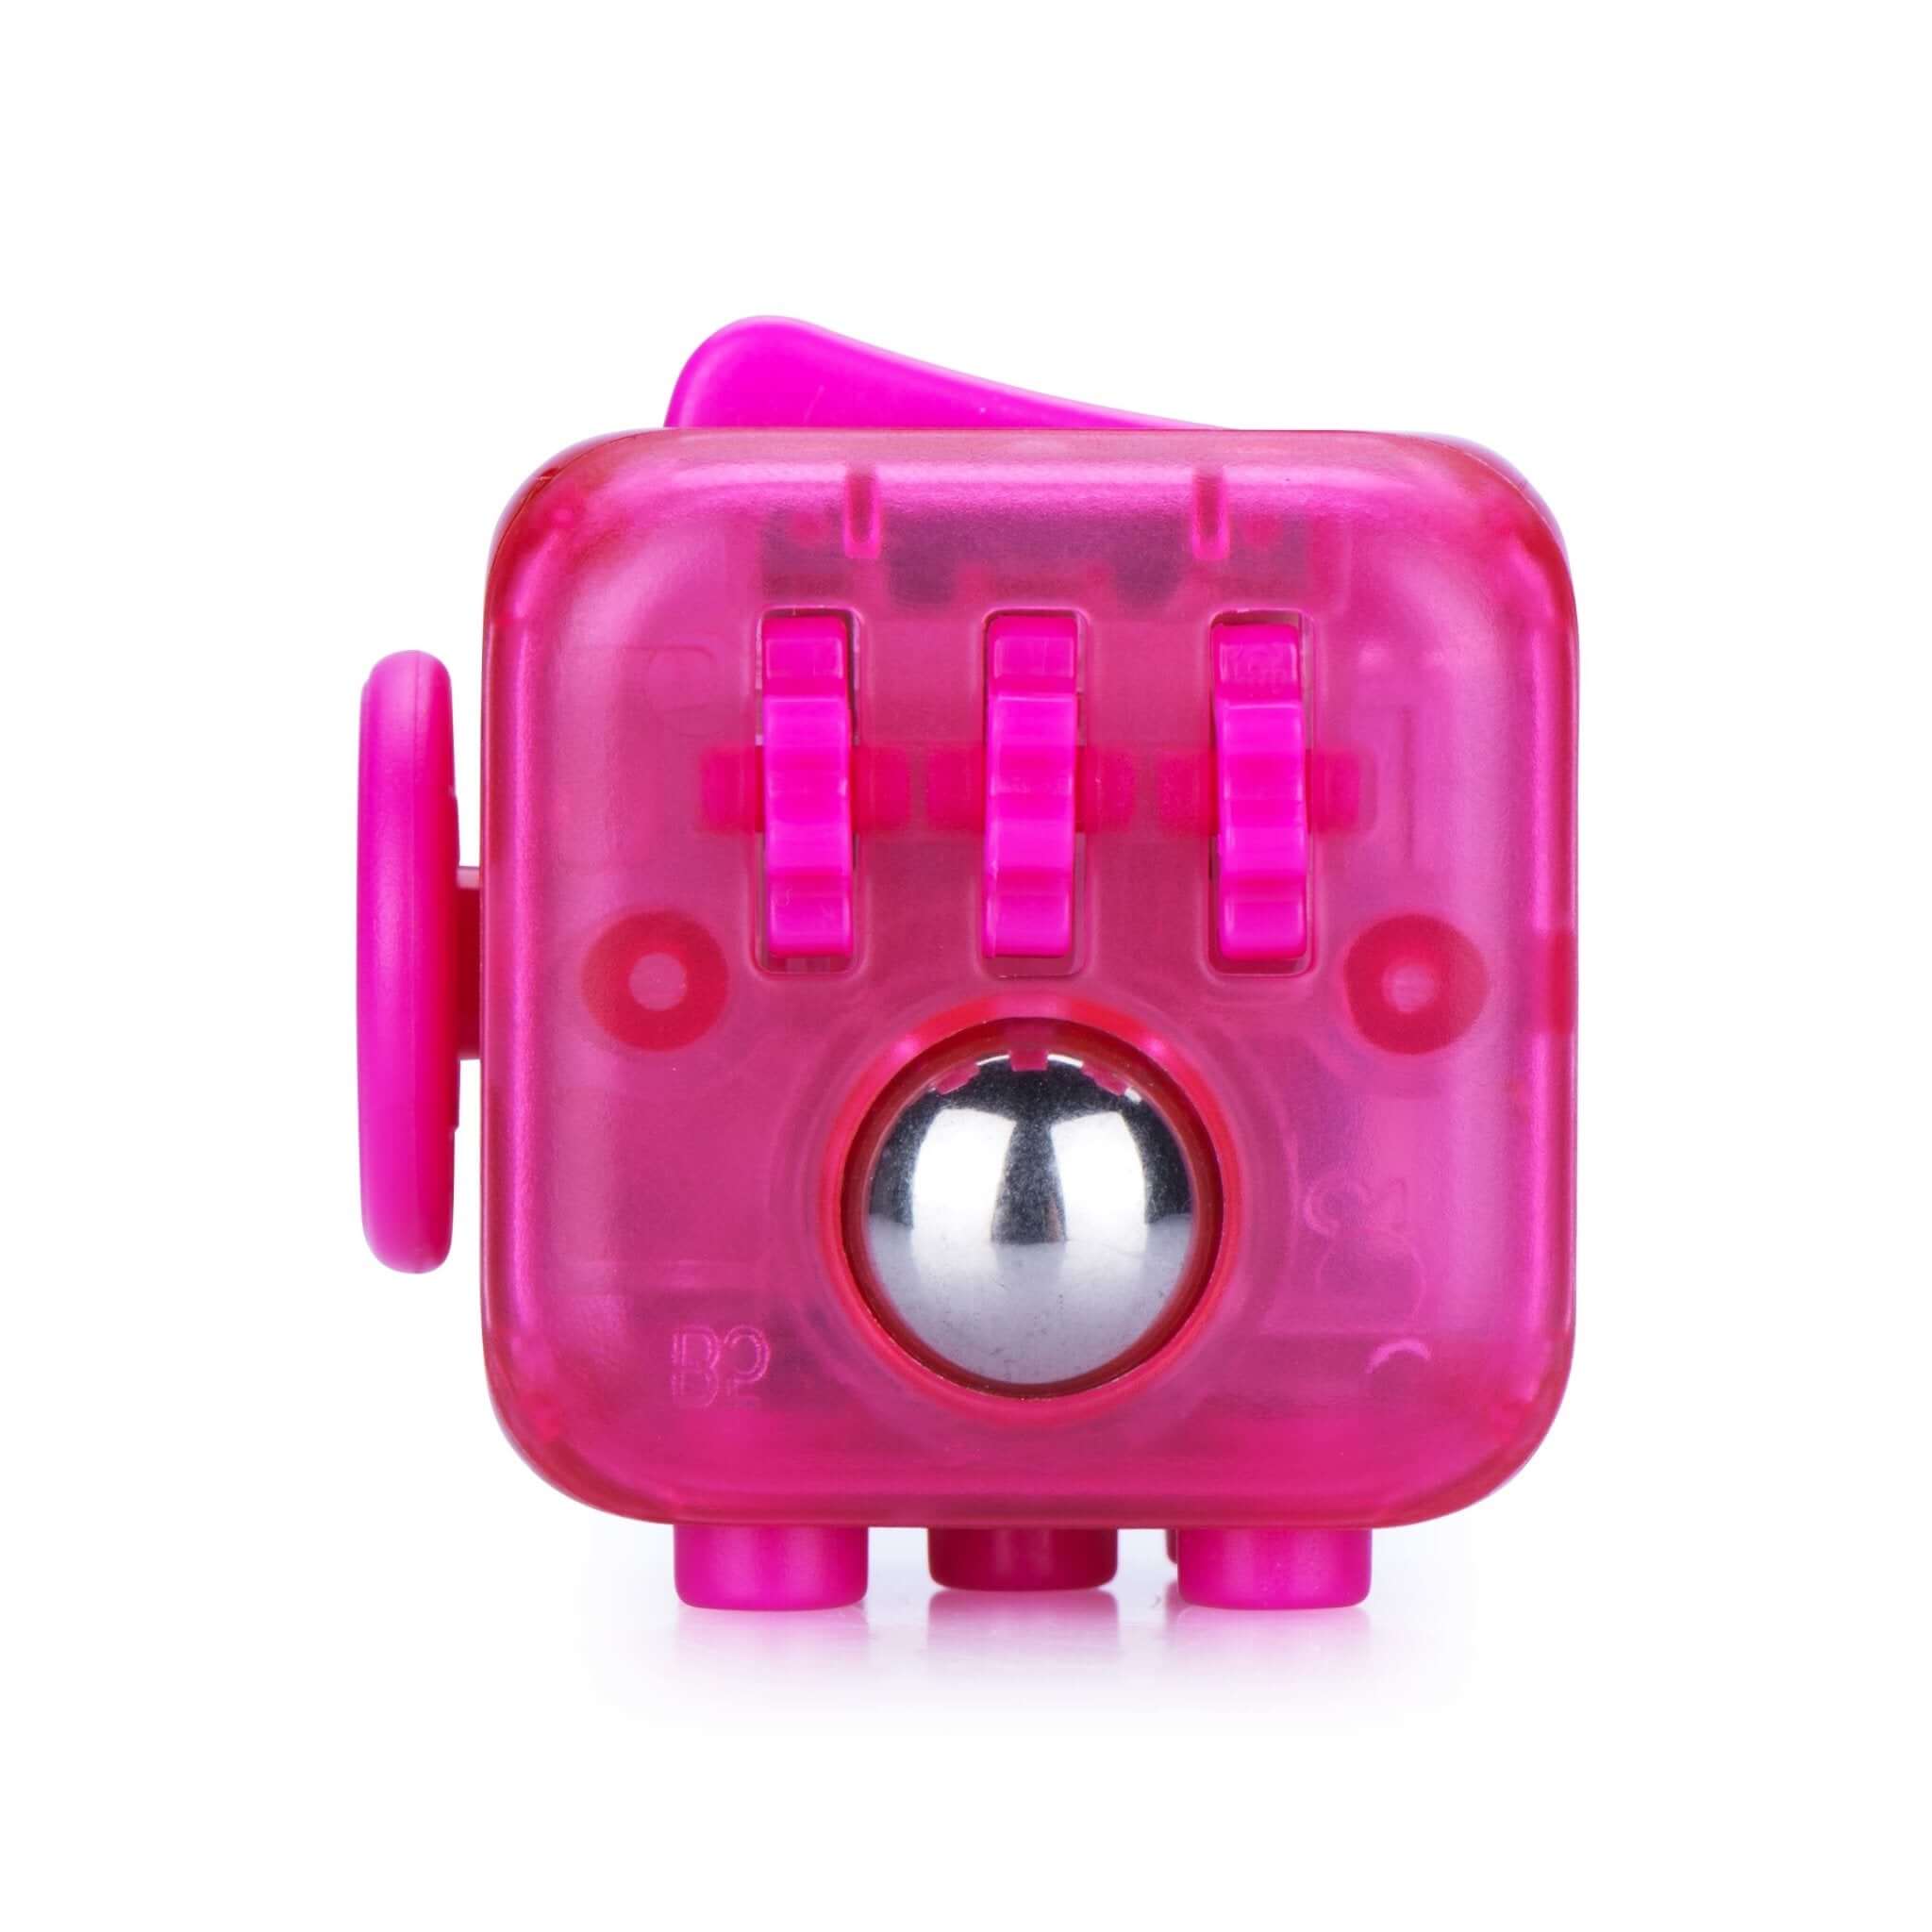 LAST CHANCE - LIMITED STOCK - Design Your Own Fidget Cube Block - Hand